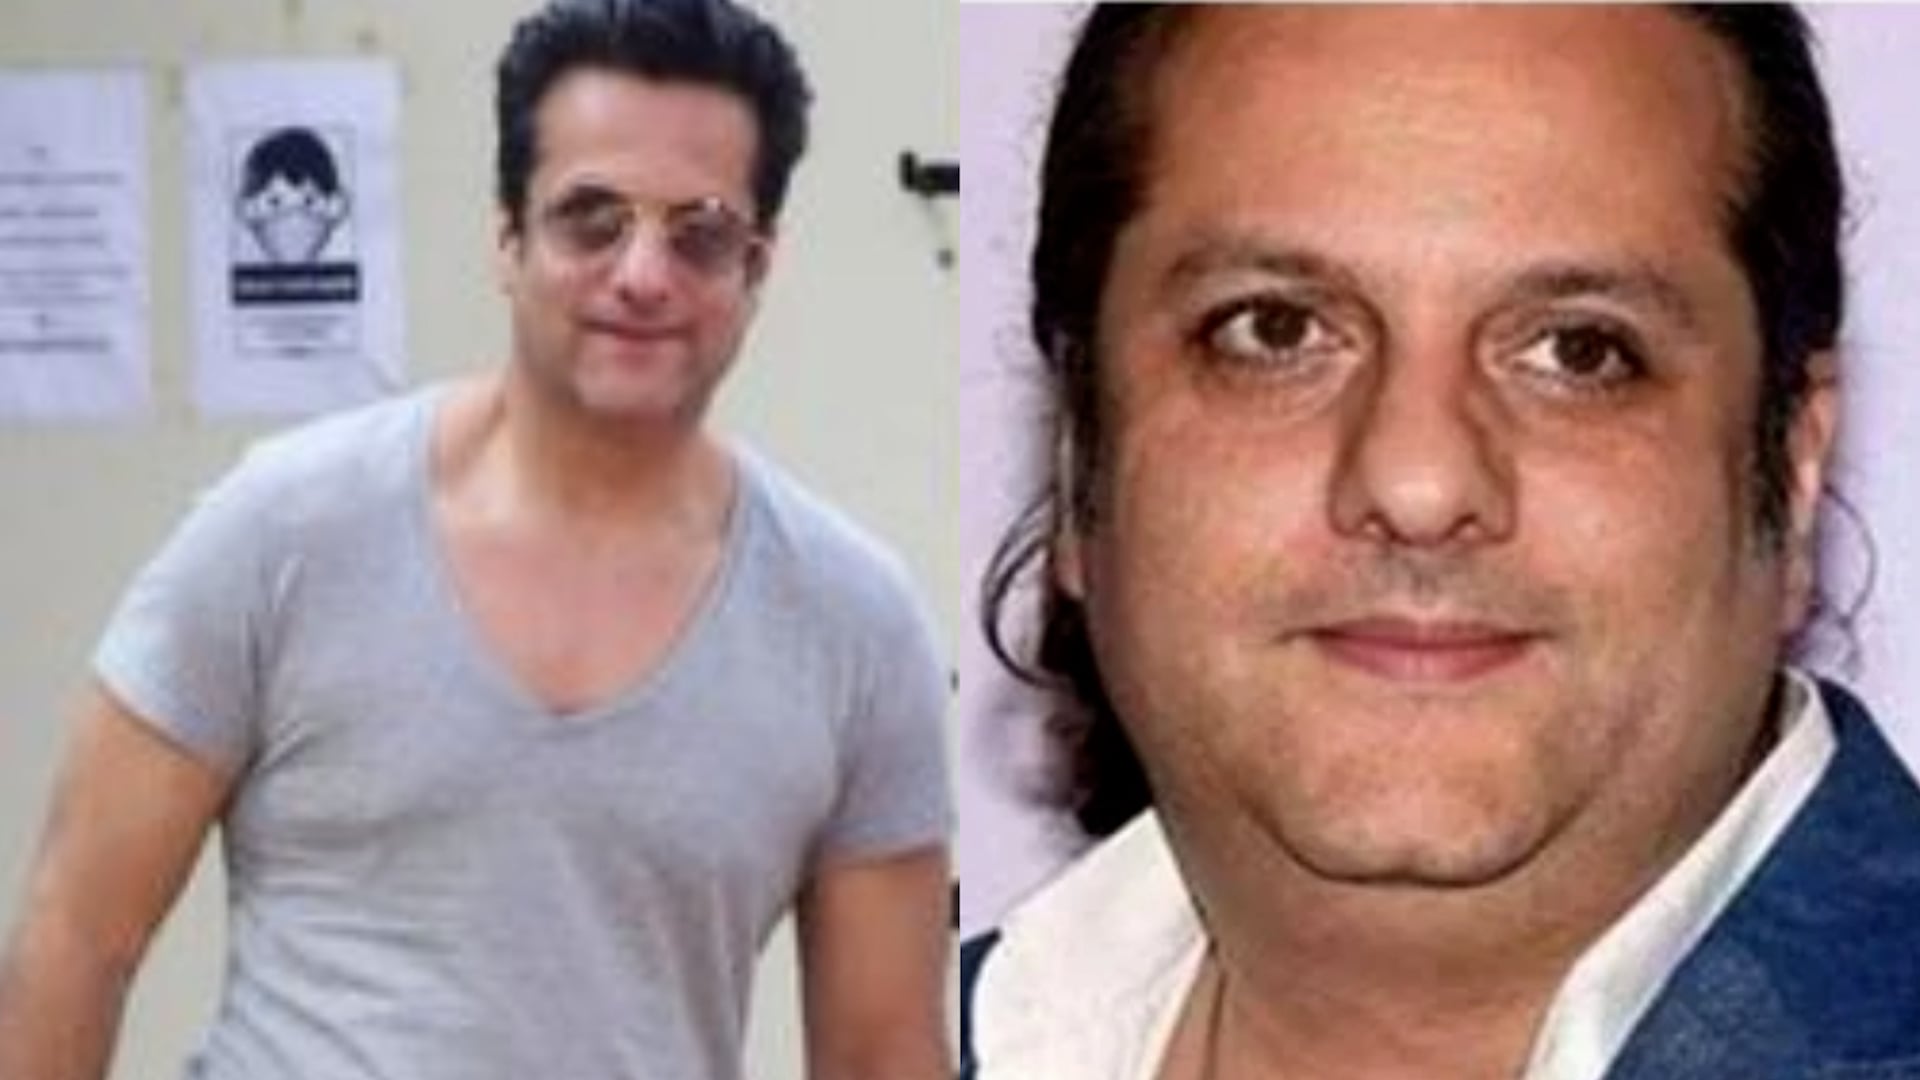 “PLEASE TELL ME what picture you will take like this ?”When Fardeen Khan was unrecognizable post his weight loss